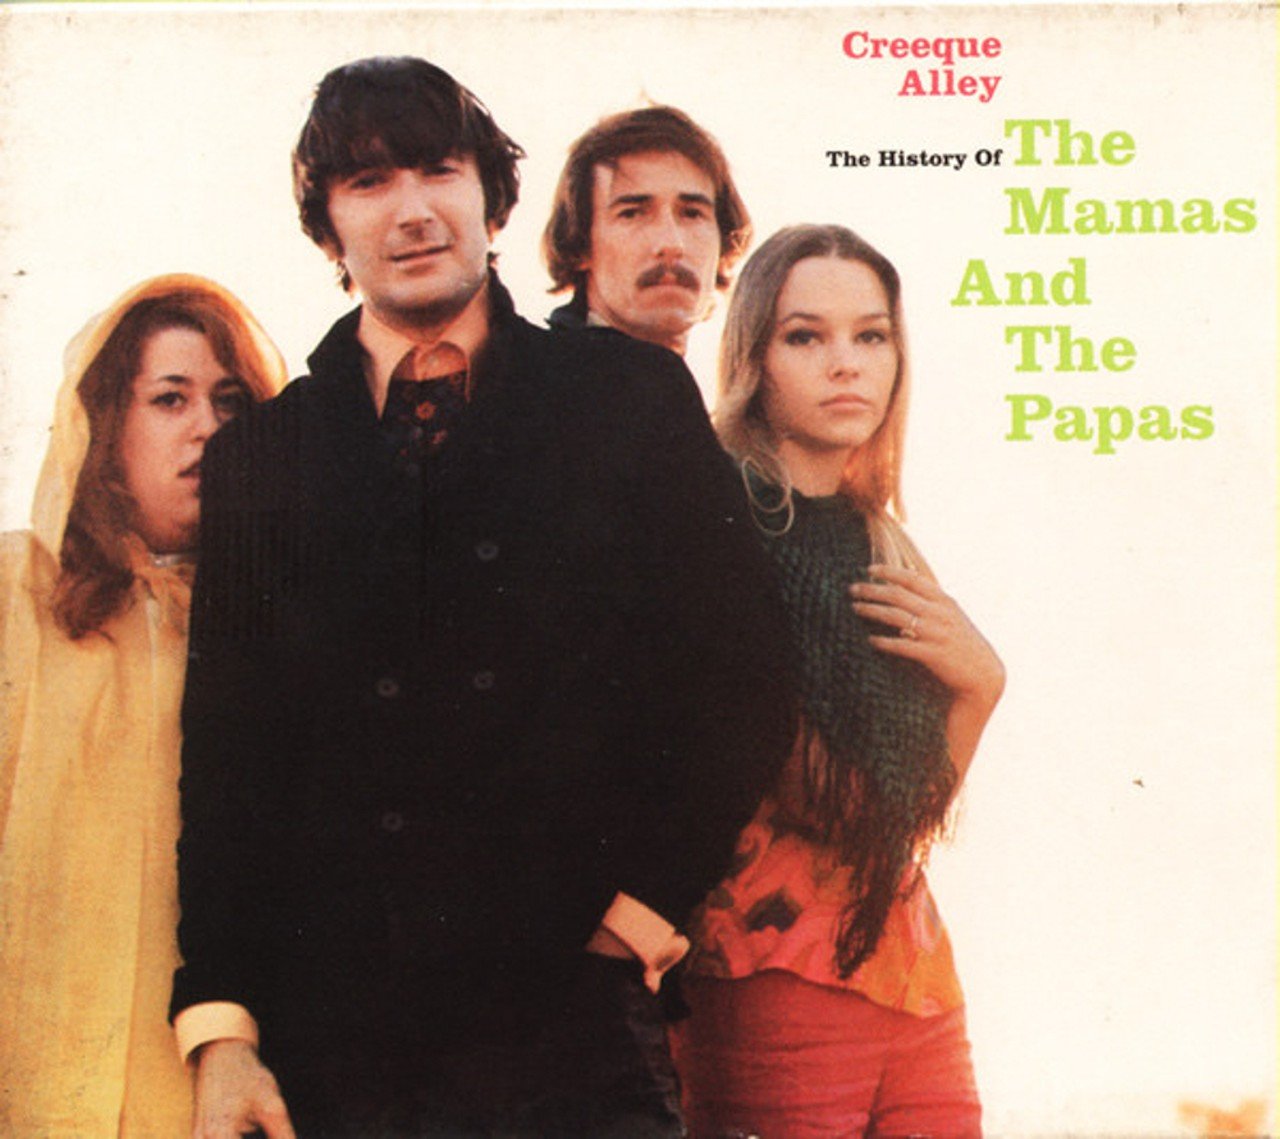  John Phillips/The Mamas & The Papas &#151; &#147;Mississippi&#148; 
&#147;Early in the mornin', she hitched a ride down to Louisville
Holdin' onto a hundred dollar bill&#148;